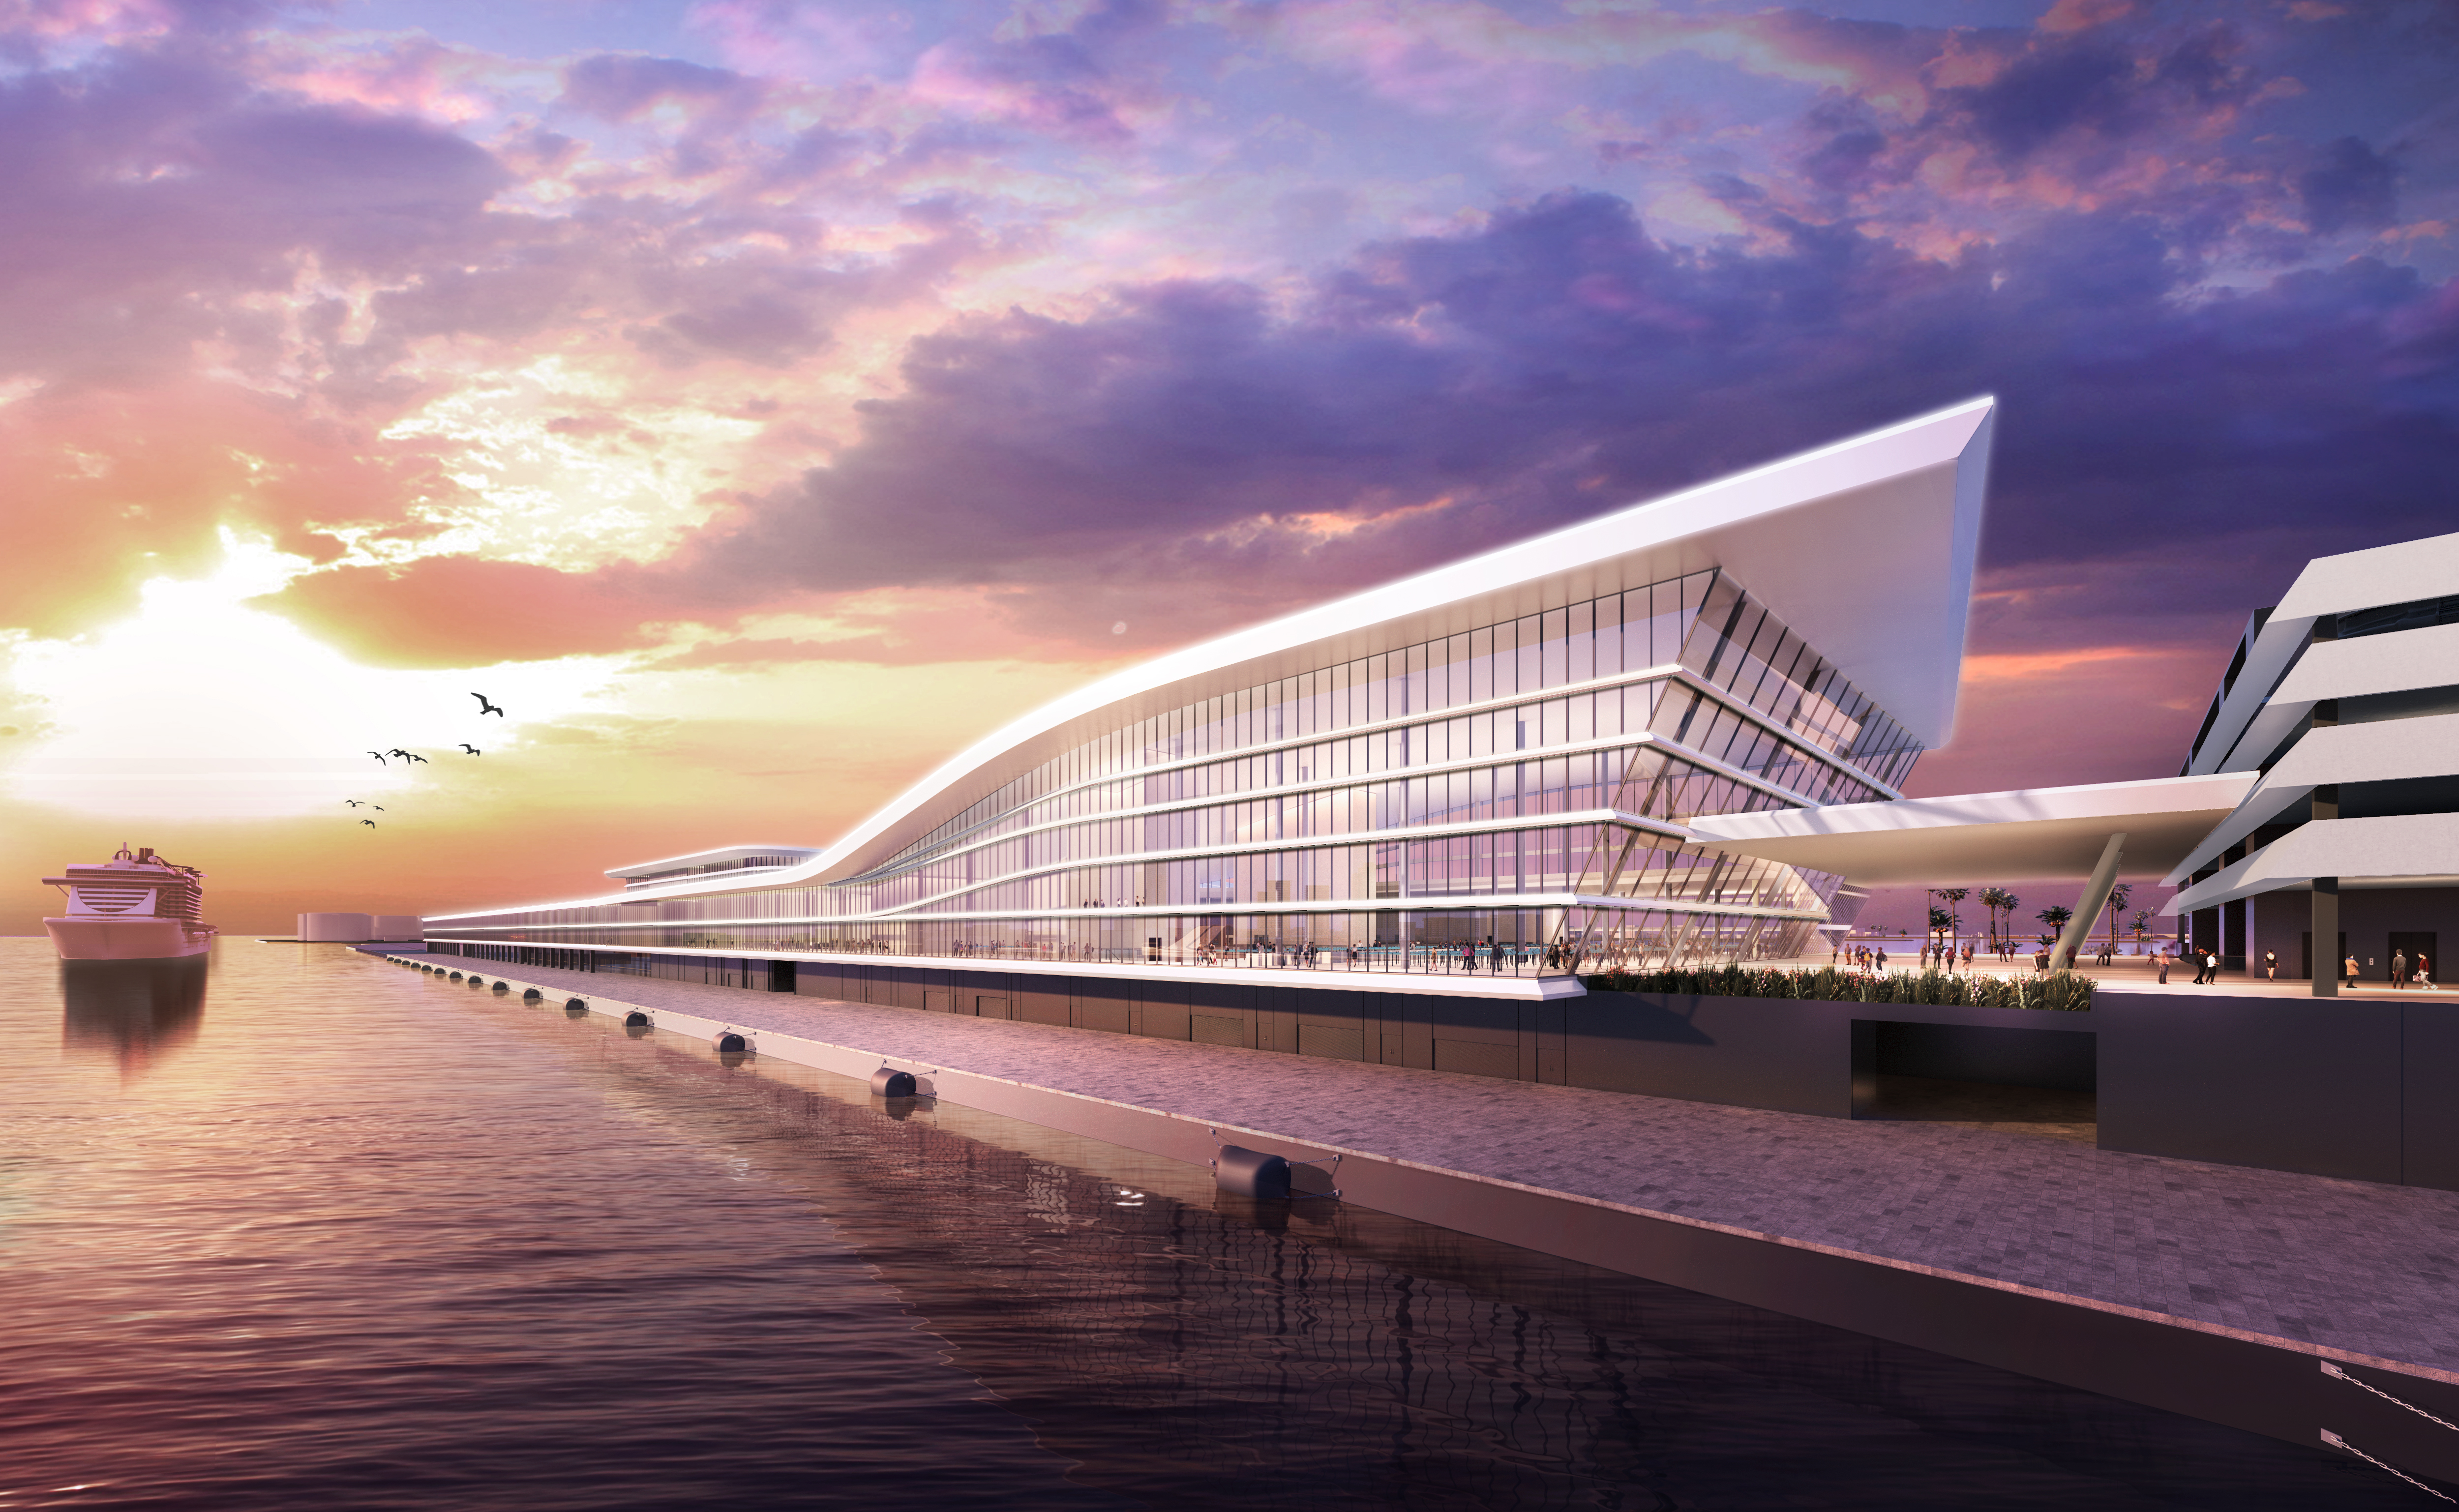 MSC Cruises Breaks Ground On New Terminal At PortMiami, Will Be Largest In North America